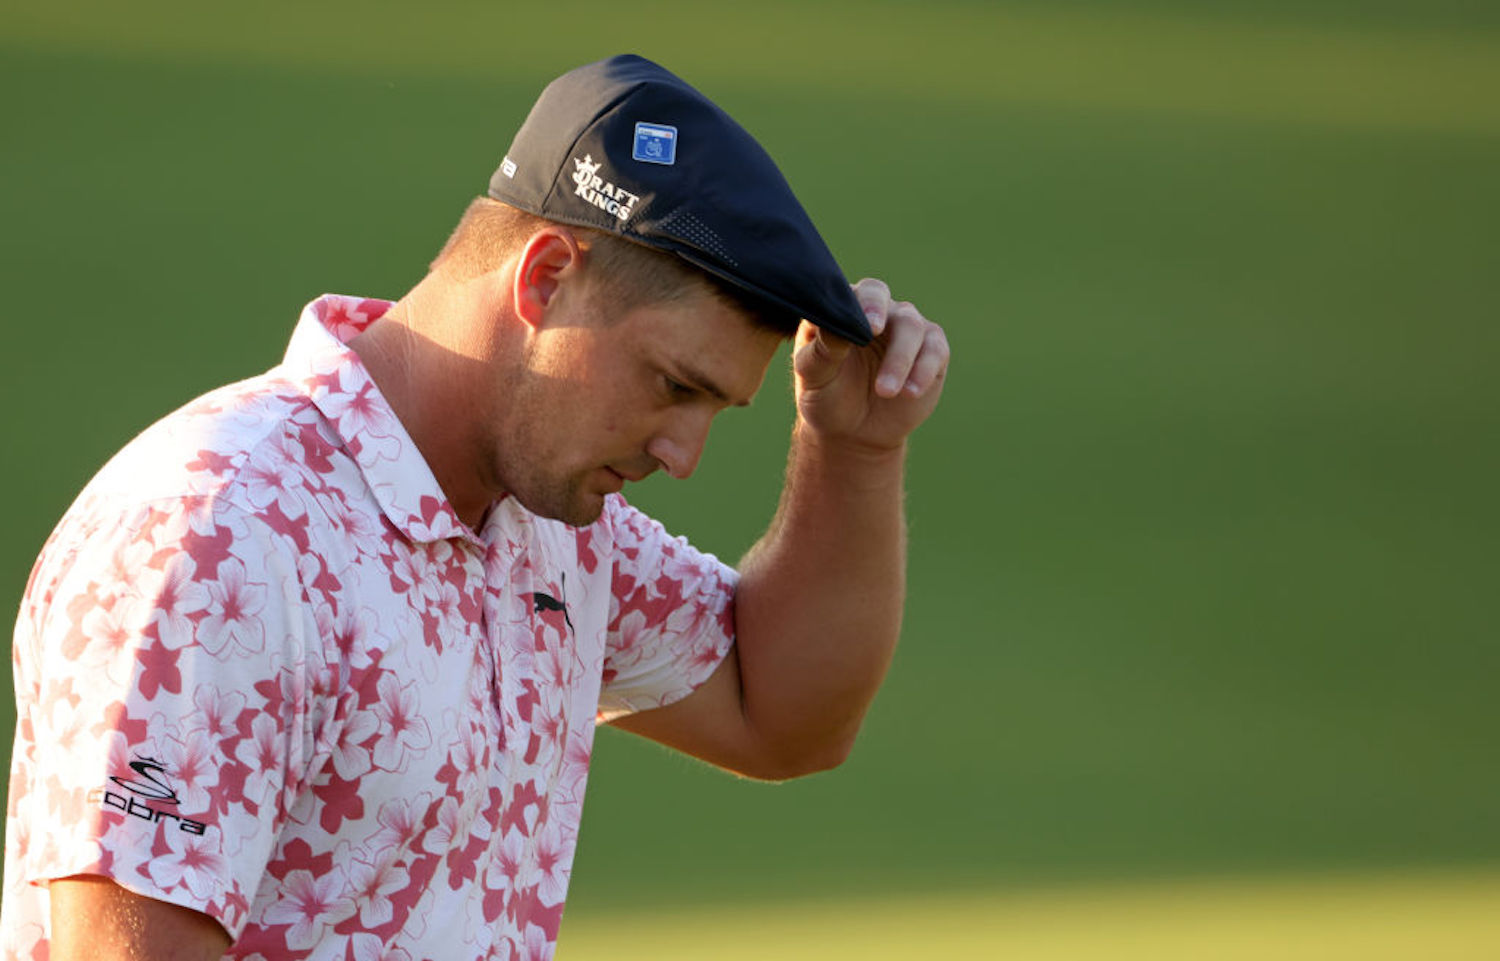 Bryson DeChambeau had high expectations heading into the 2020 Masters, but it turns out distance isn't everything in golf.